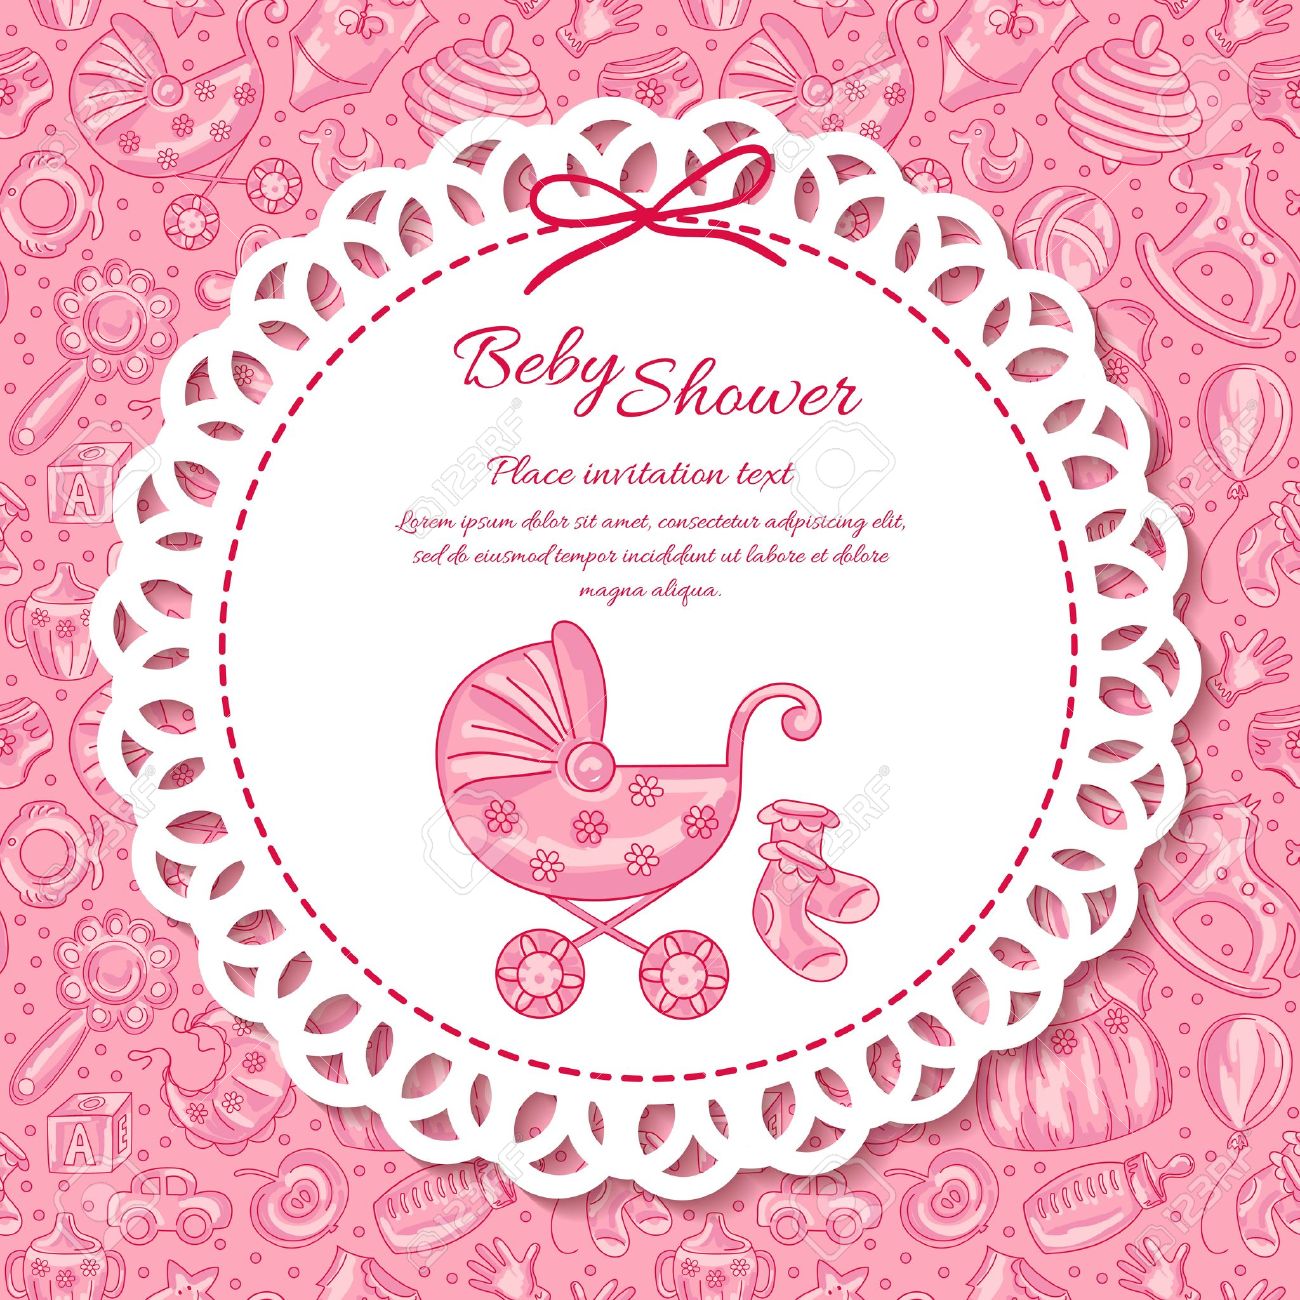 Full Size of Baby Shower:stylish Baby Shower Wishes Picture Inspirations Baby Shower Wishes Baby Shower Greeting Card For Baby Seamless Pattern Baby